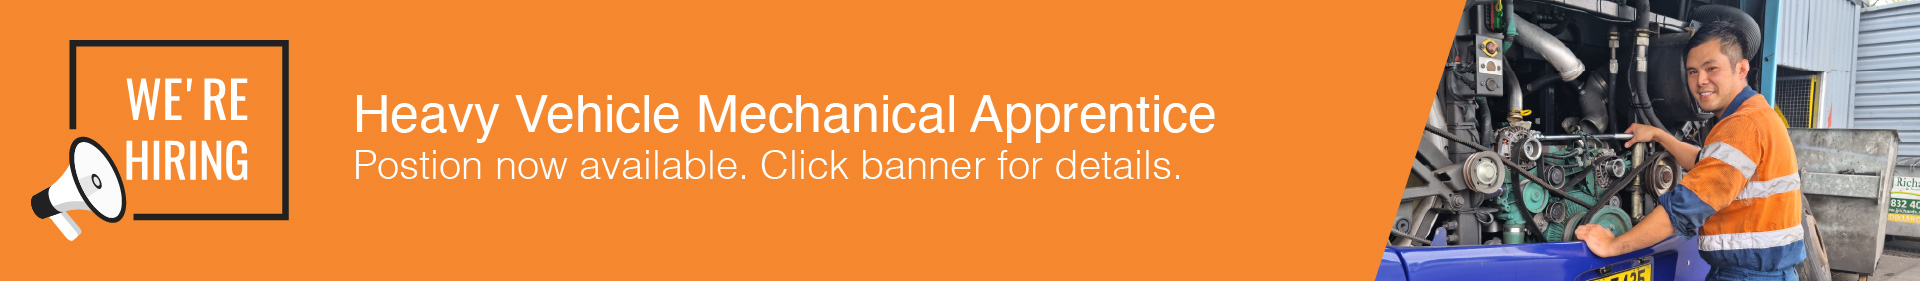 Heavy Commercial Vehicle Mechanical Technology Apprentice Banner